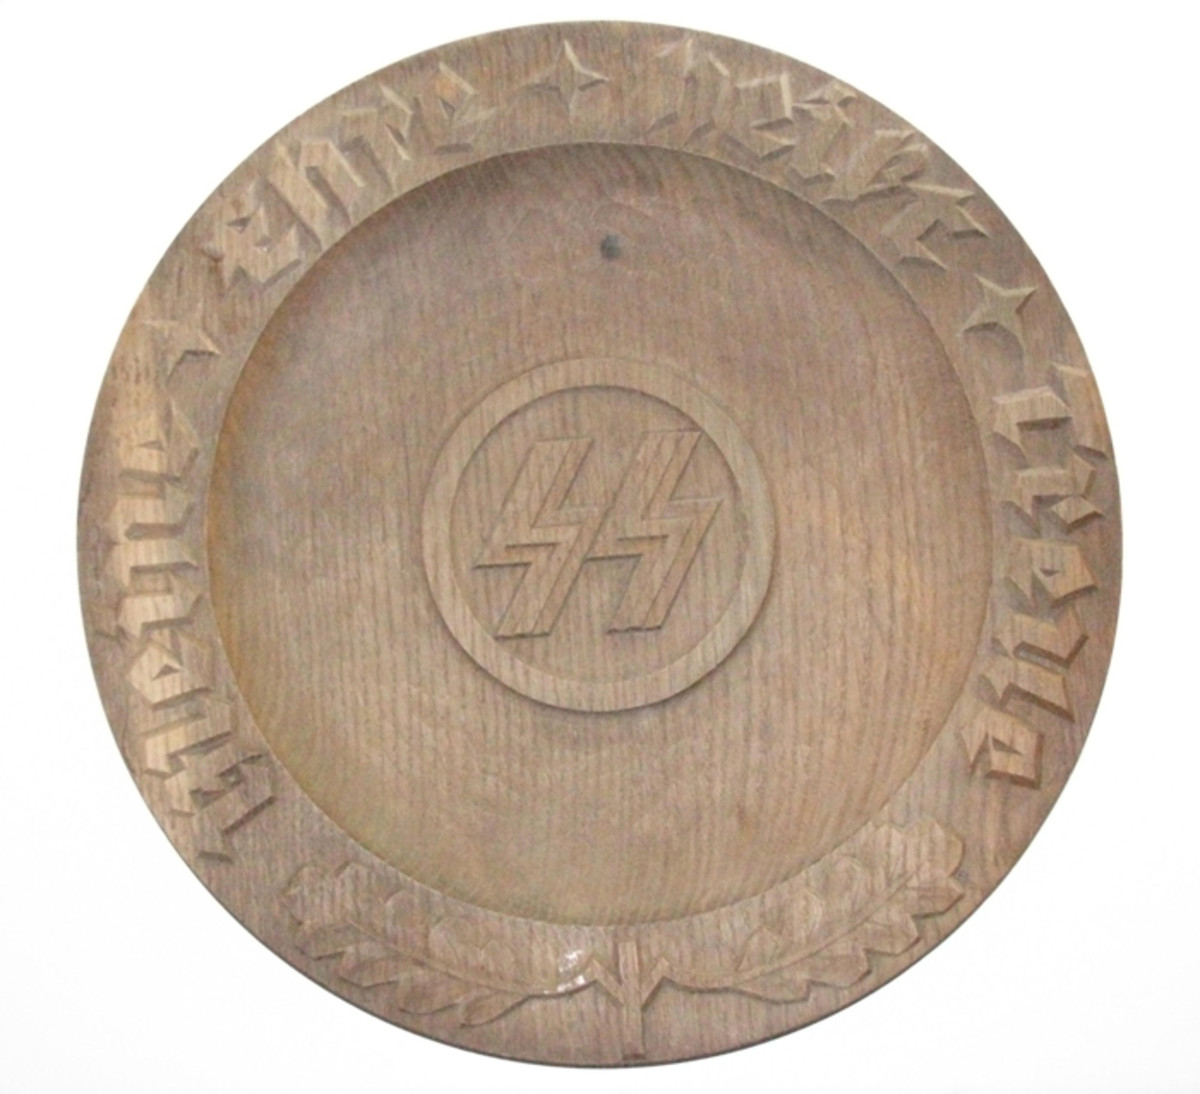 A decorative SS wall plate bears the motto “Meine Ehre Heisst Treue” (My Honor is Loyalty), SS runes and a Life rune with oak leaves along the bottom.